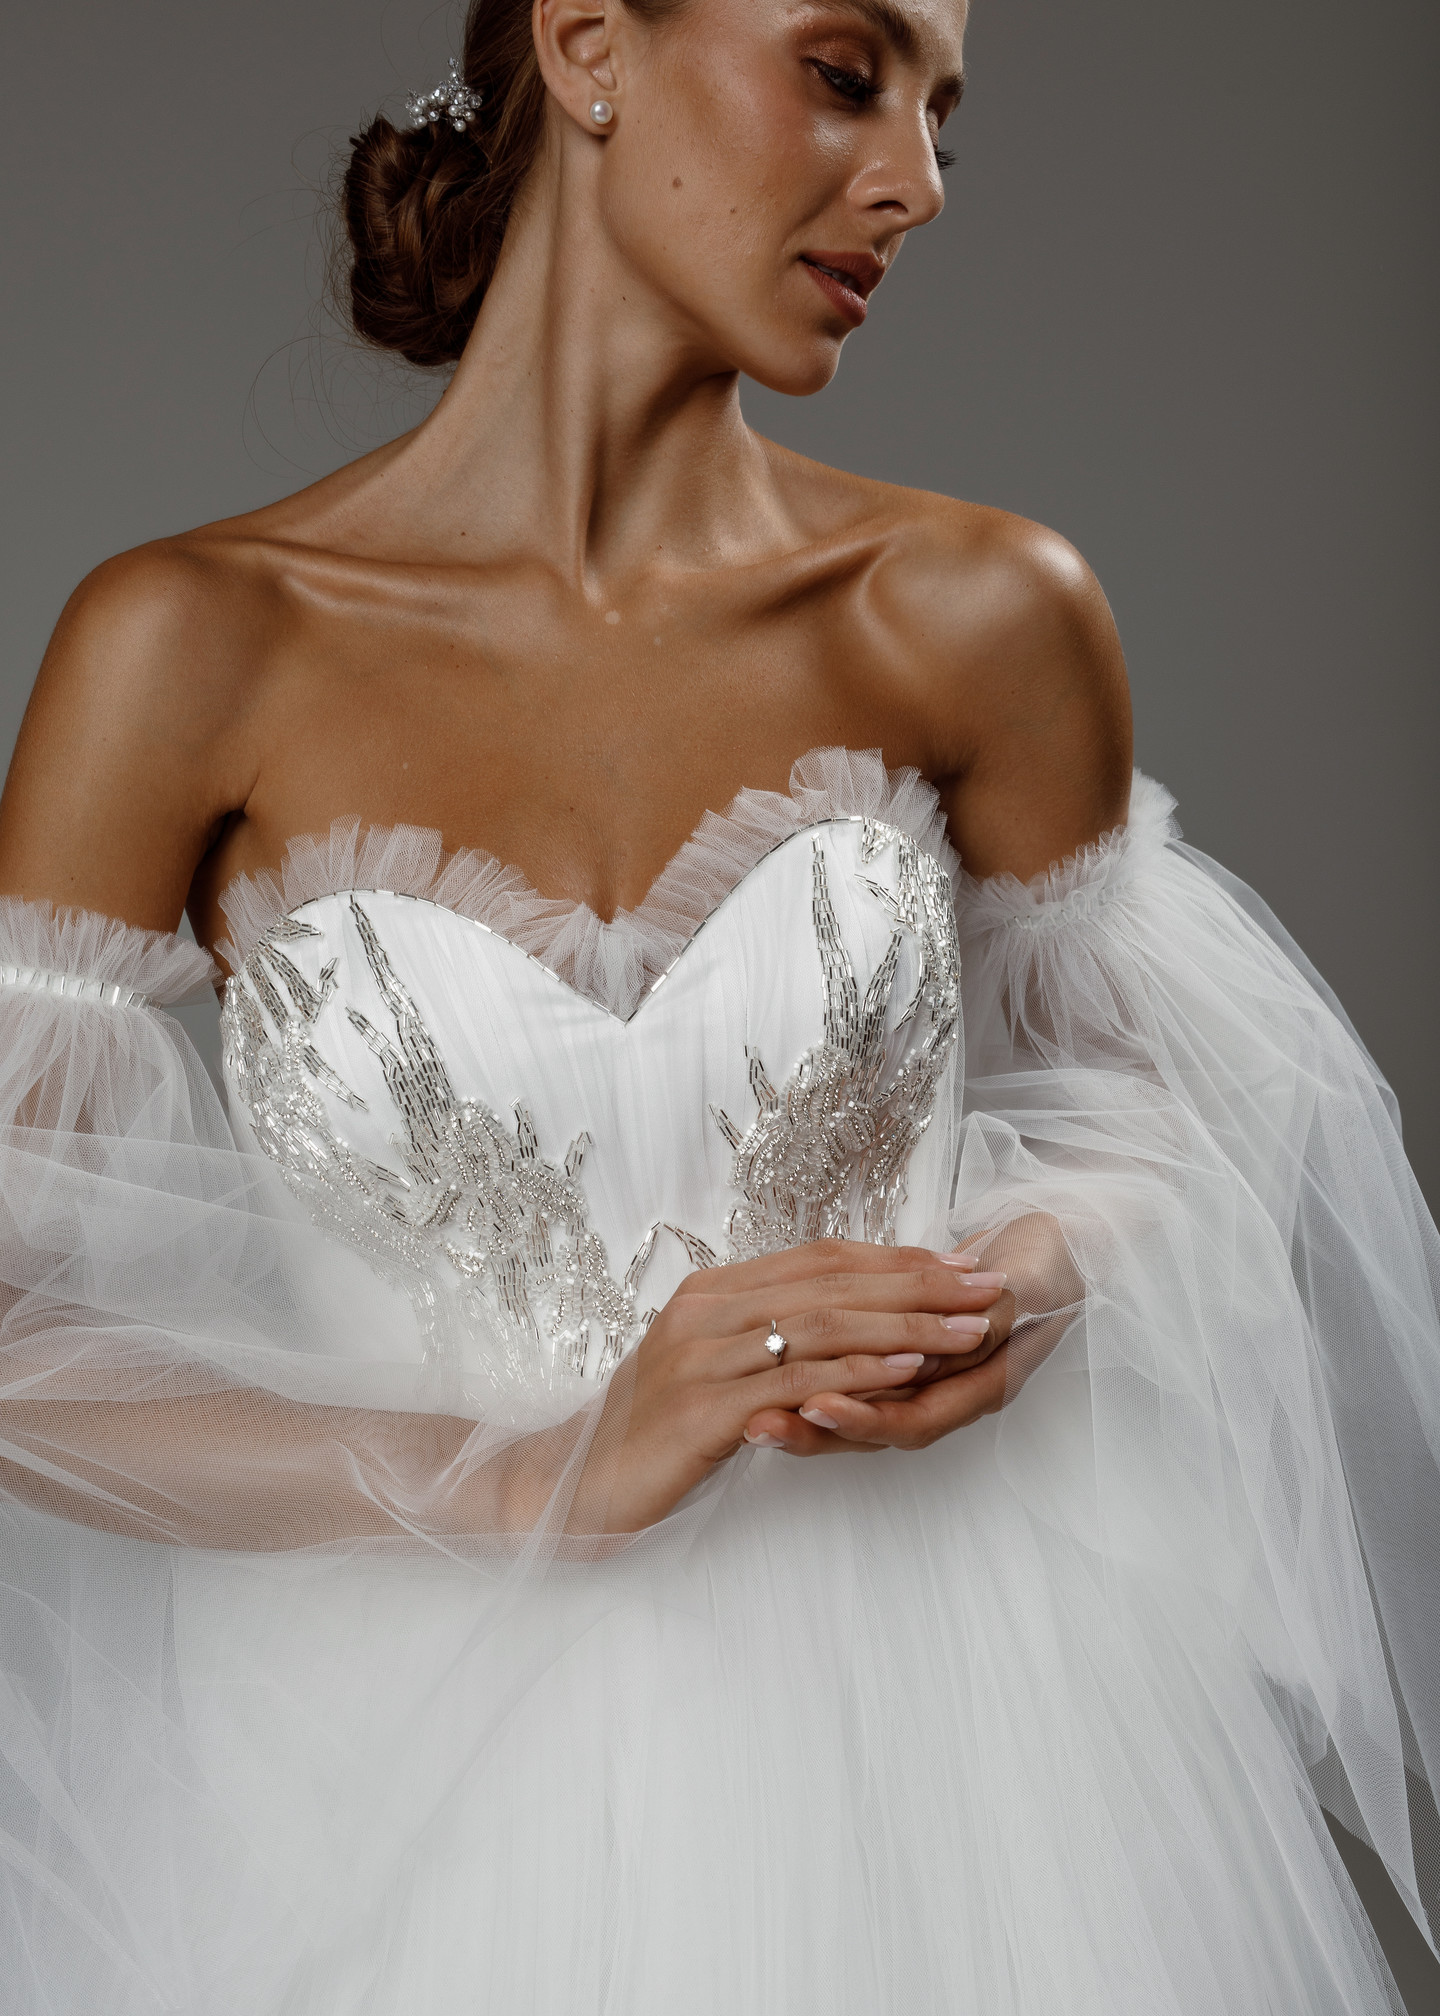 Melody gown, 2020, couture, dress, bridal, off-white, tulle, embroidery, A-line, train, sleeves, archive